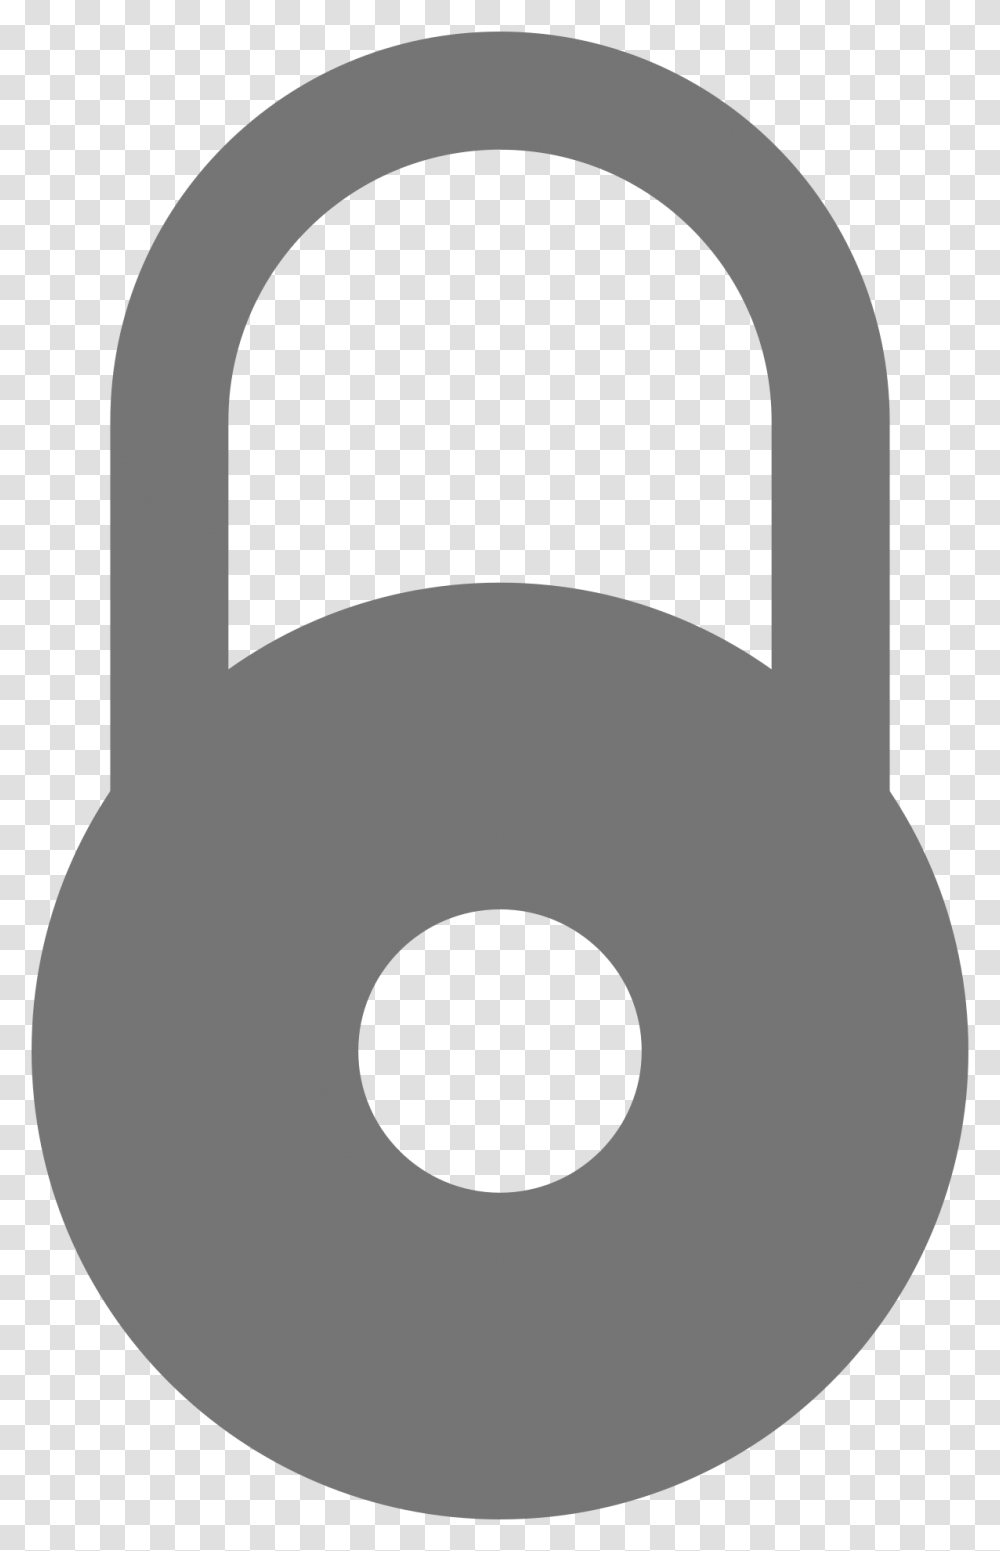 Lock Grey Open Access Closed Access, Combination Lock Transparent Png